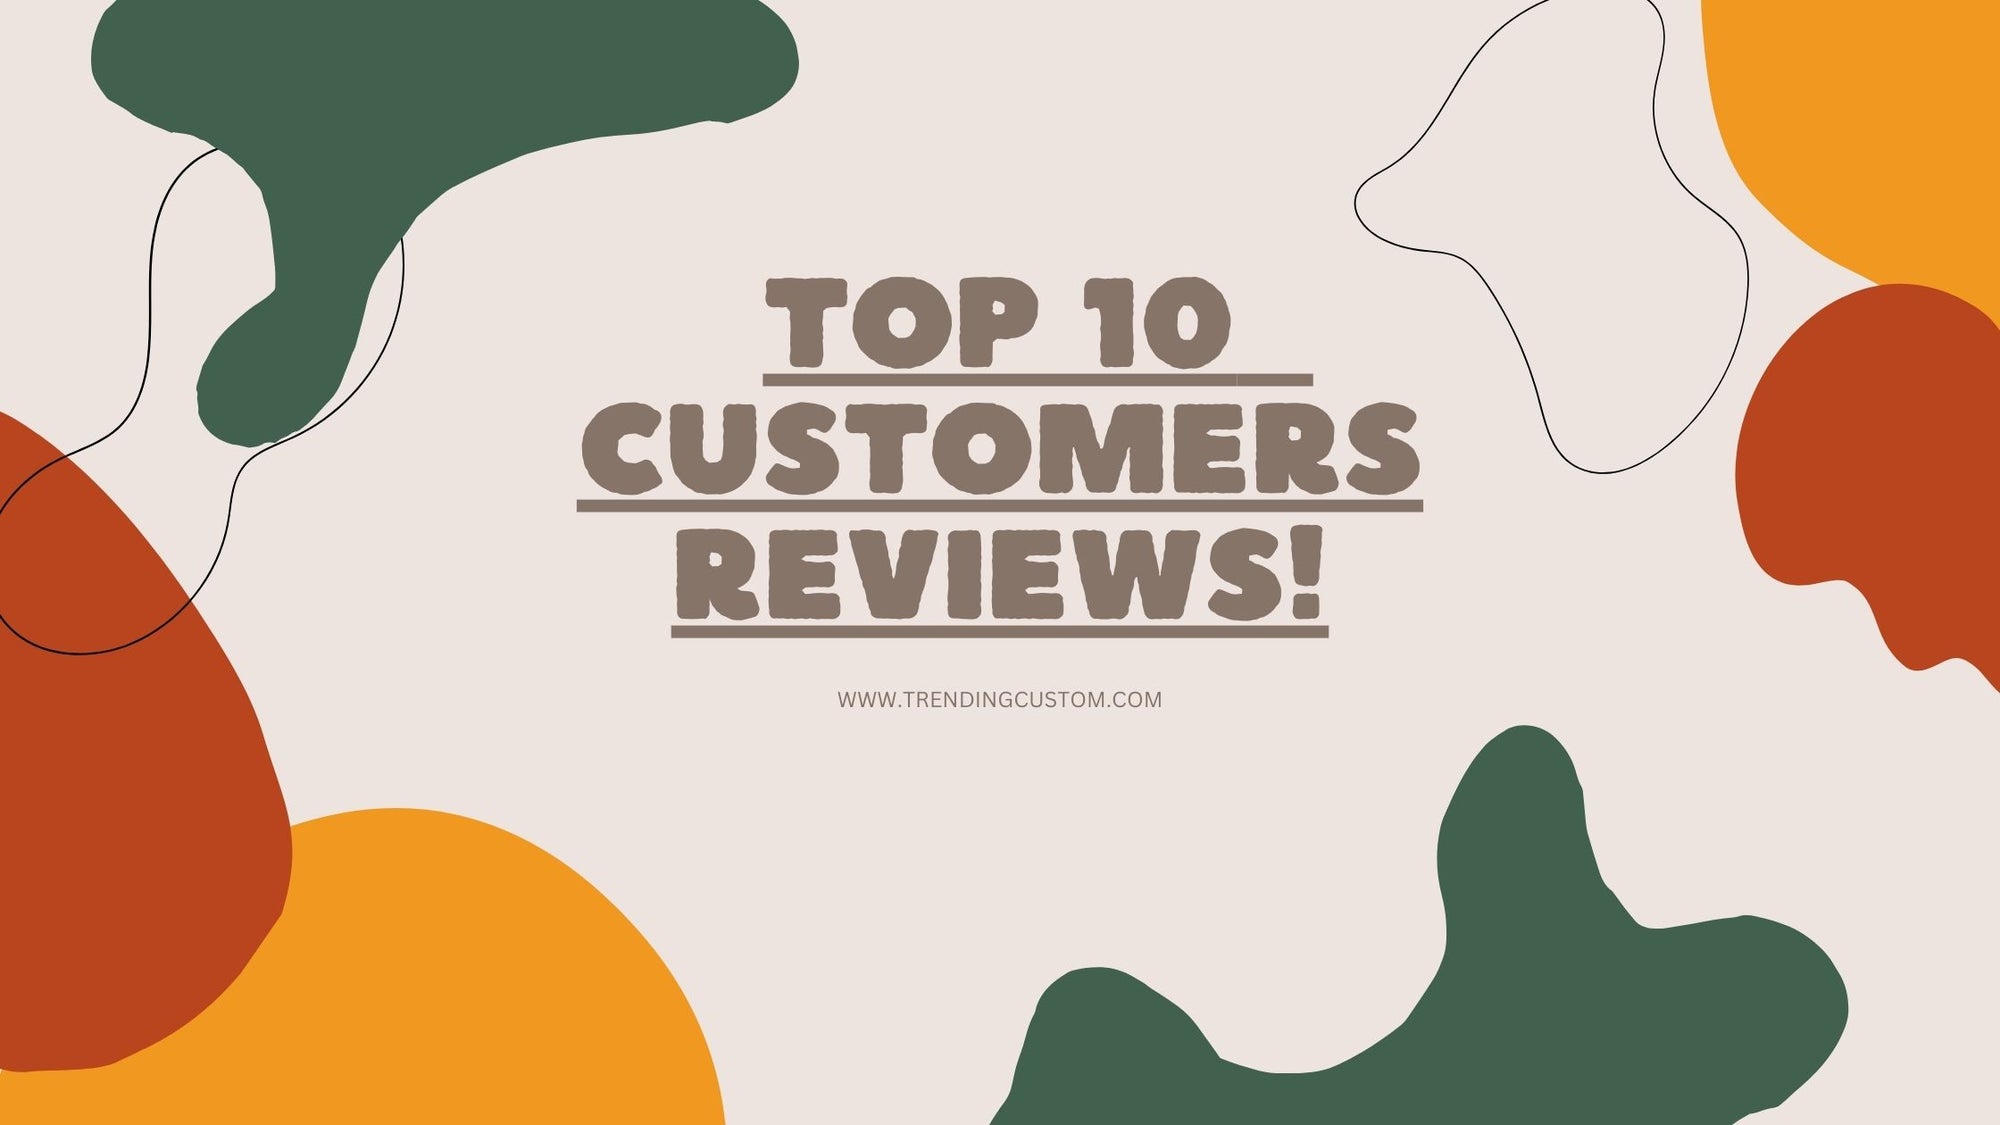 Top 10 Raving Reviews: Our Customers Speak Out! - April 1st